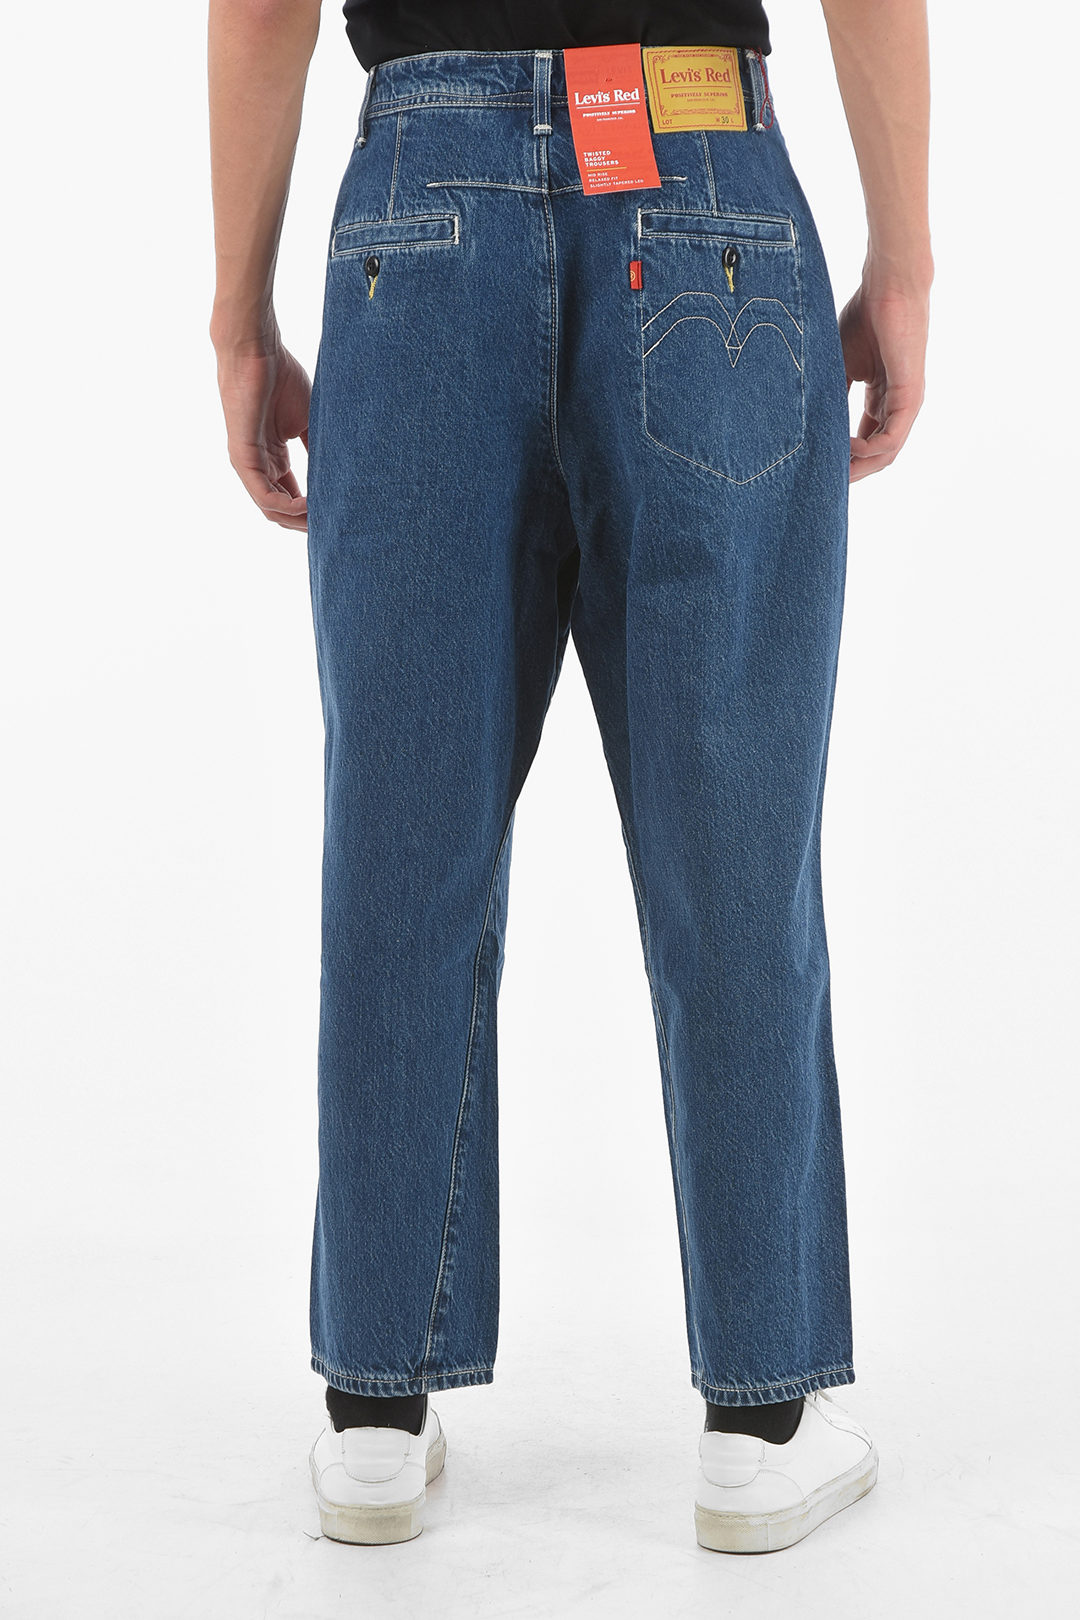 Levi's RED Mid-wash TWISTED Baggy Jeans with 4 Pockets 23cm men - Glamood  Outlet